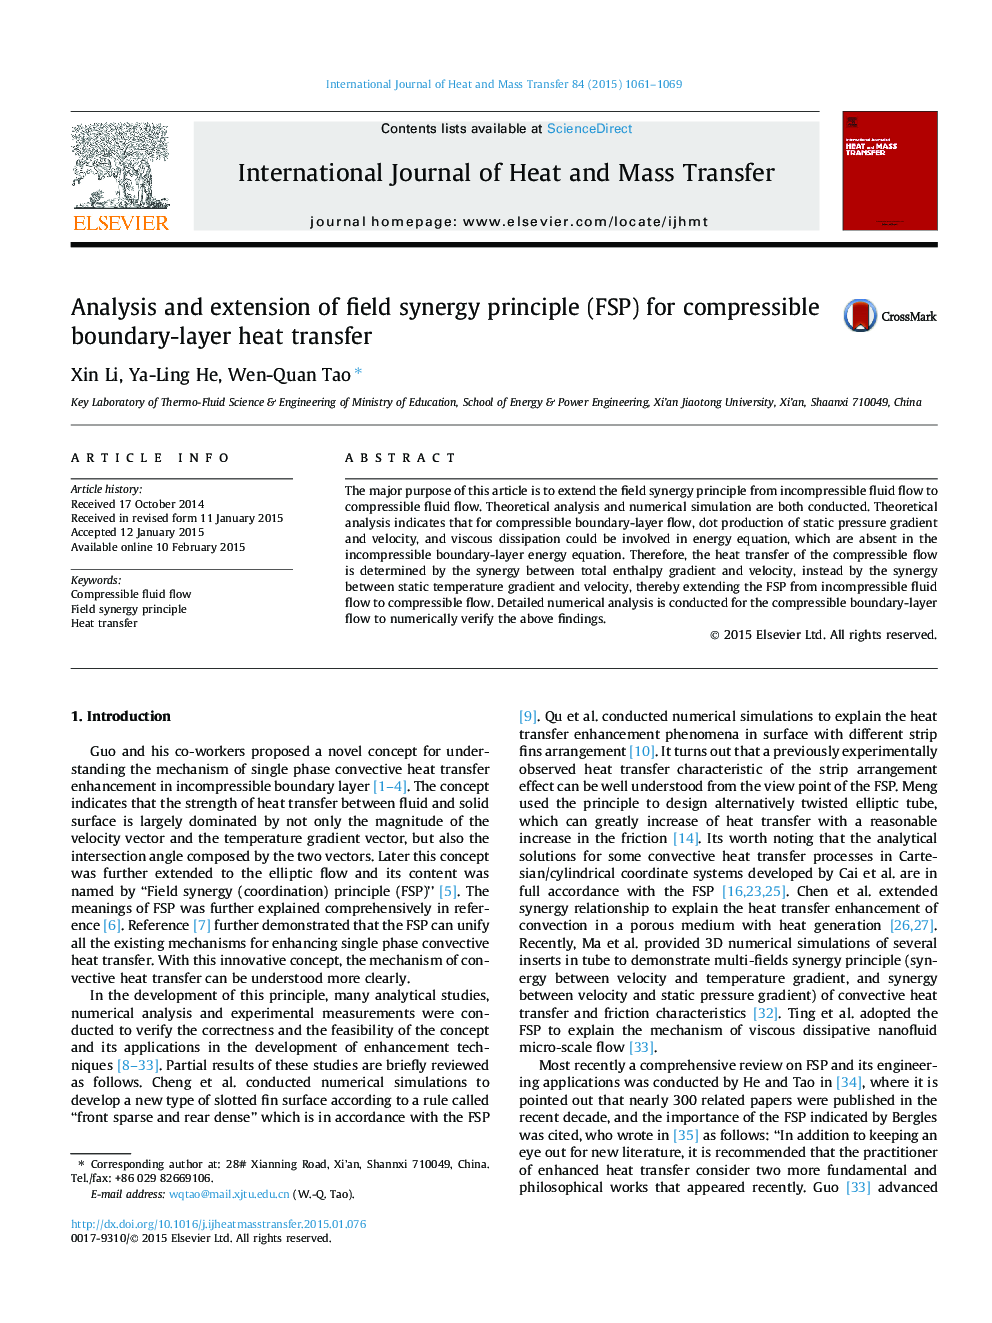 Analysis and extension of field synergy principle (FSP) for compressible boundary-layer heat transfer